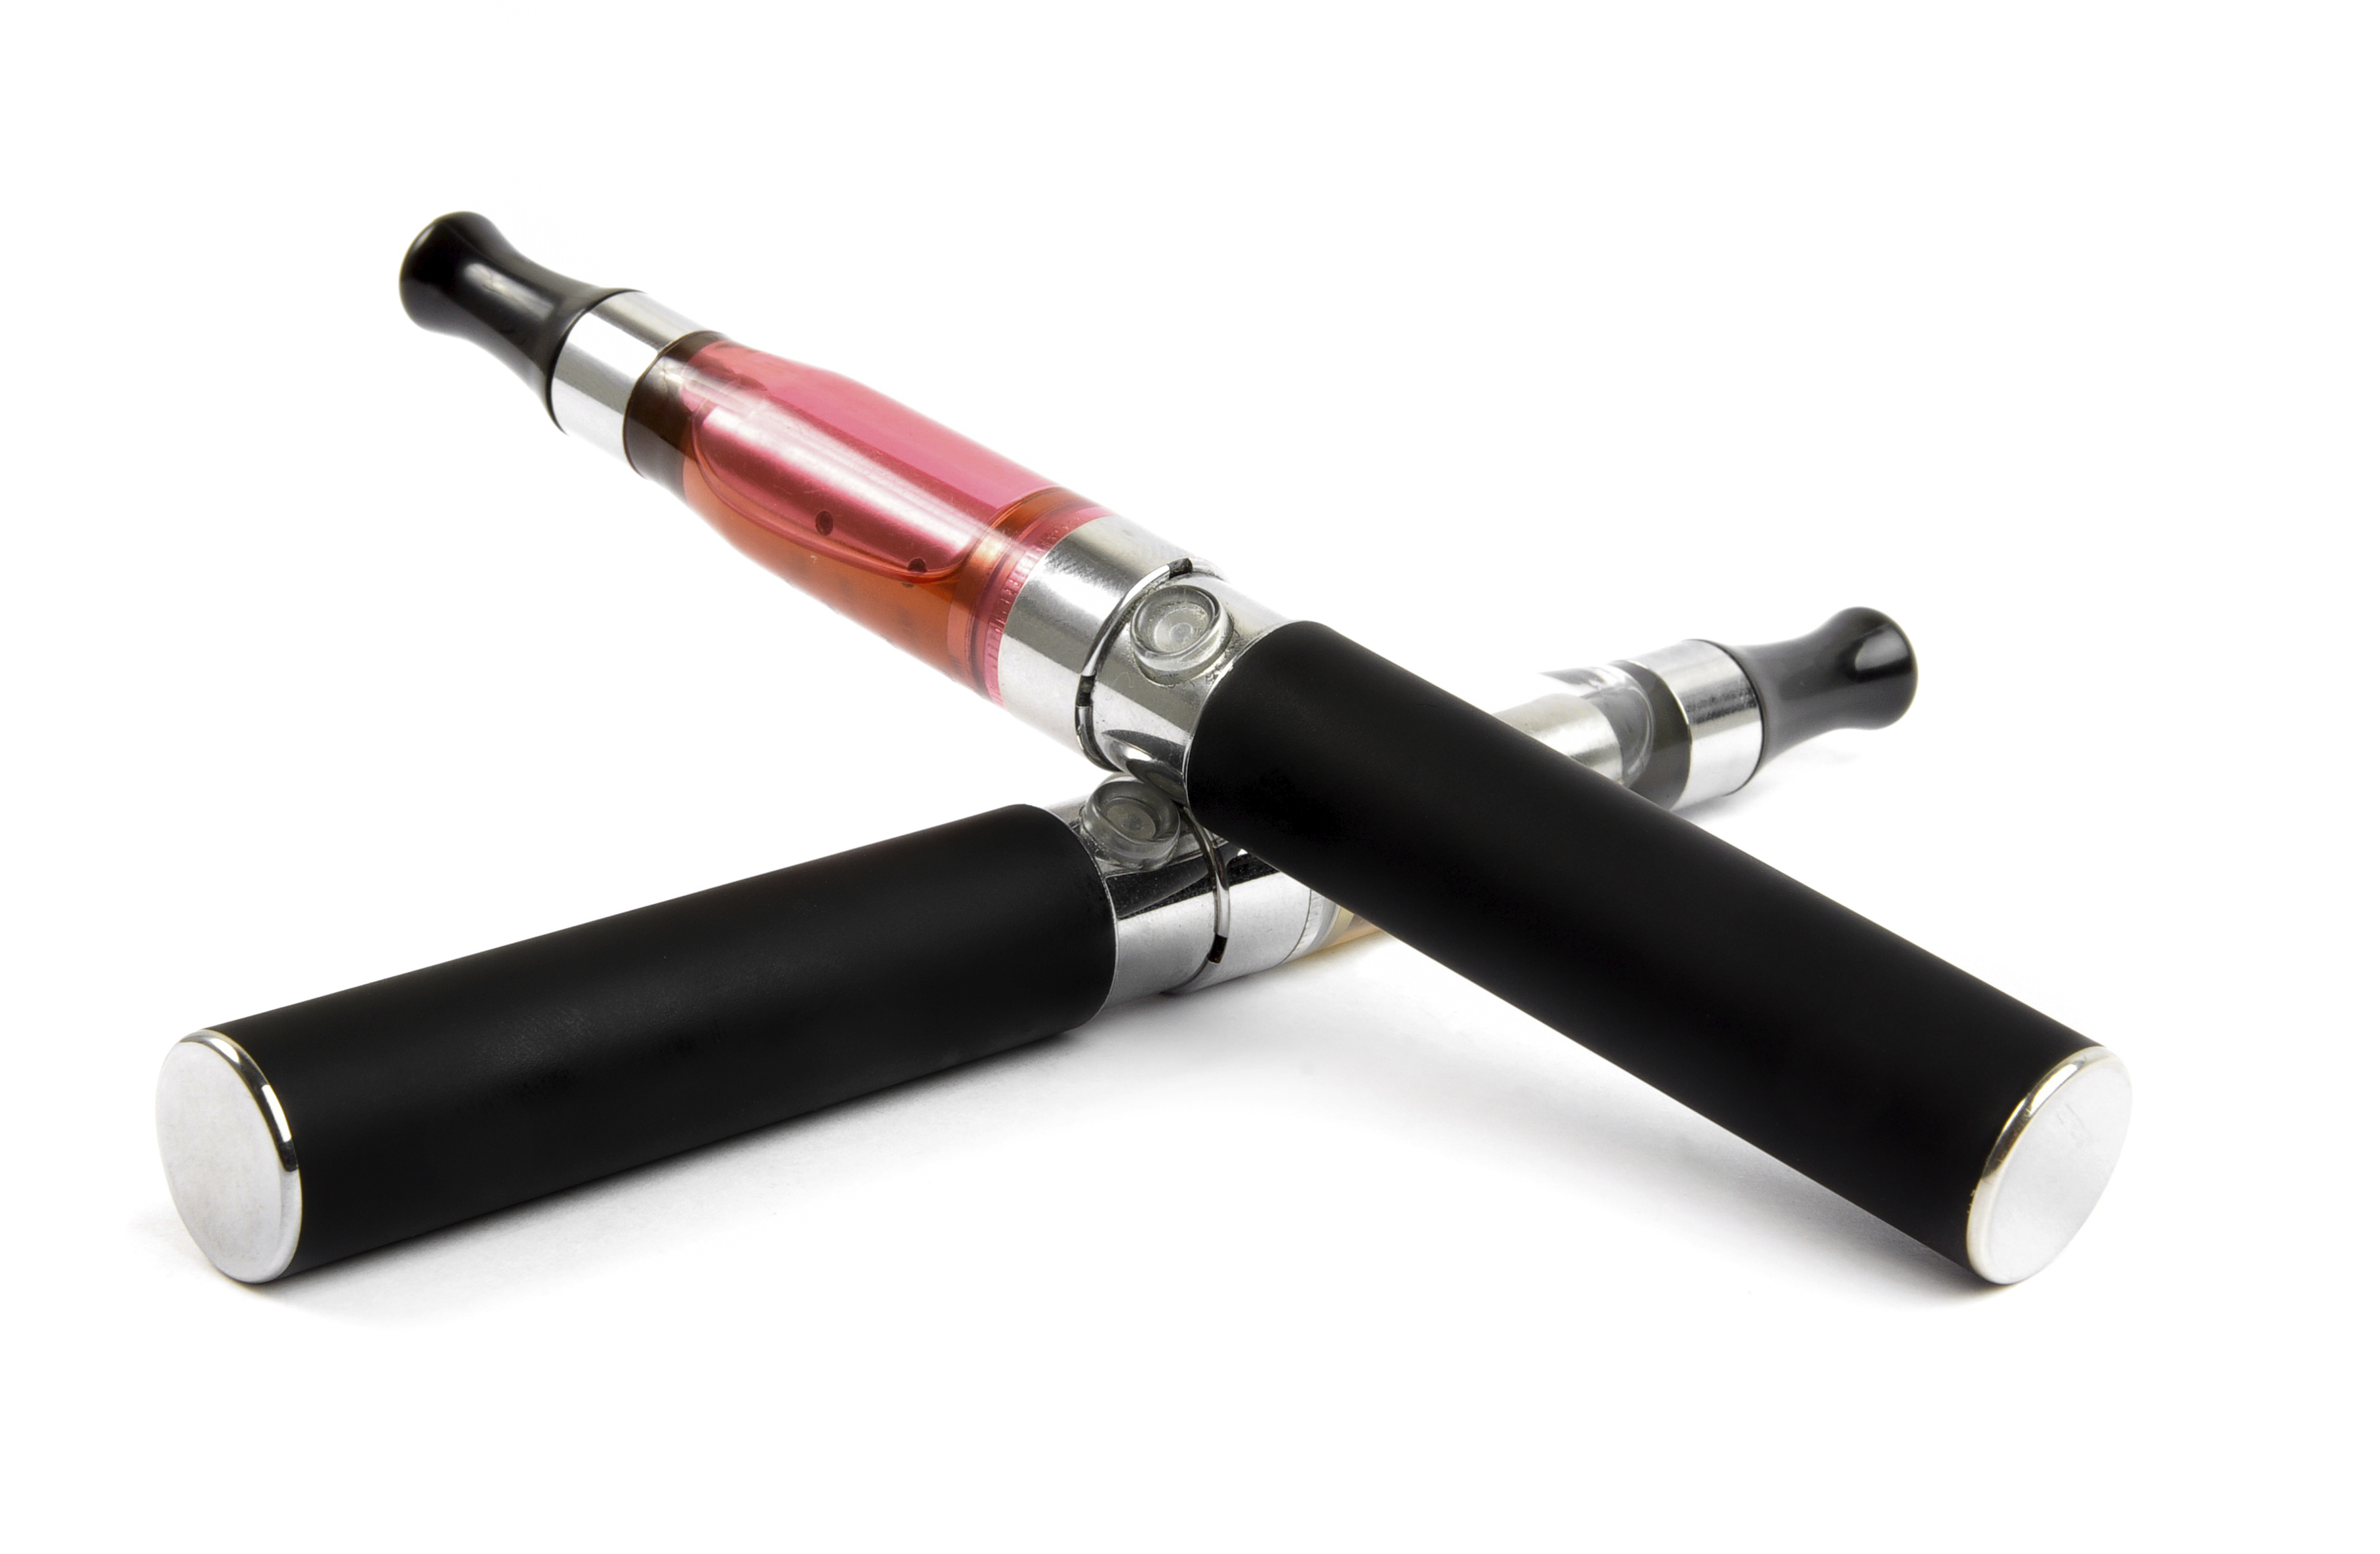 poisoning from e-cigarettes on the rise